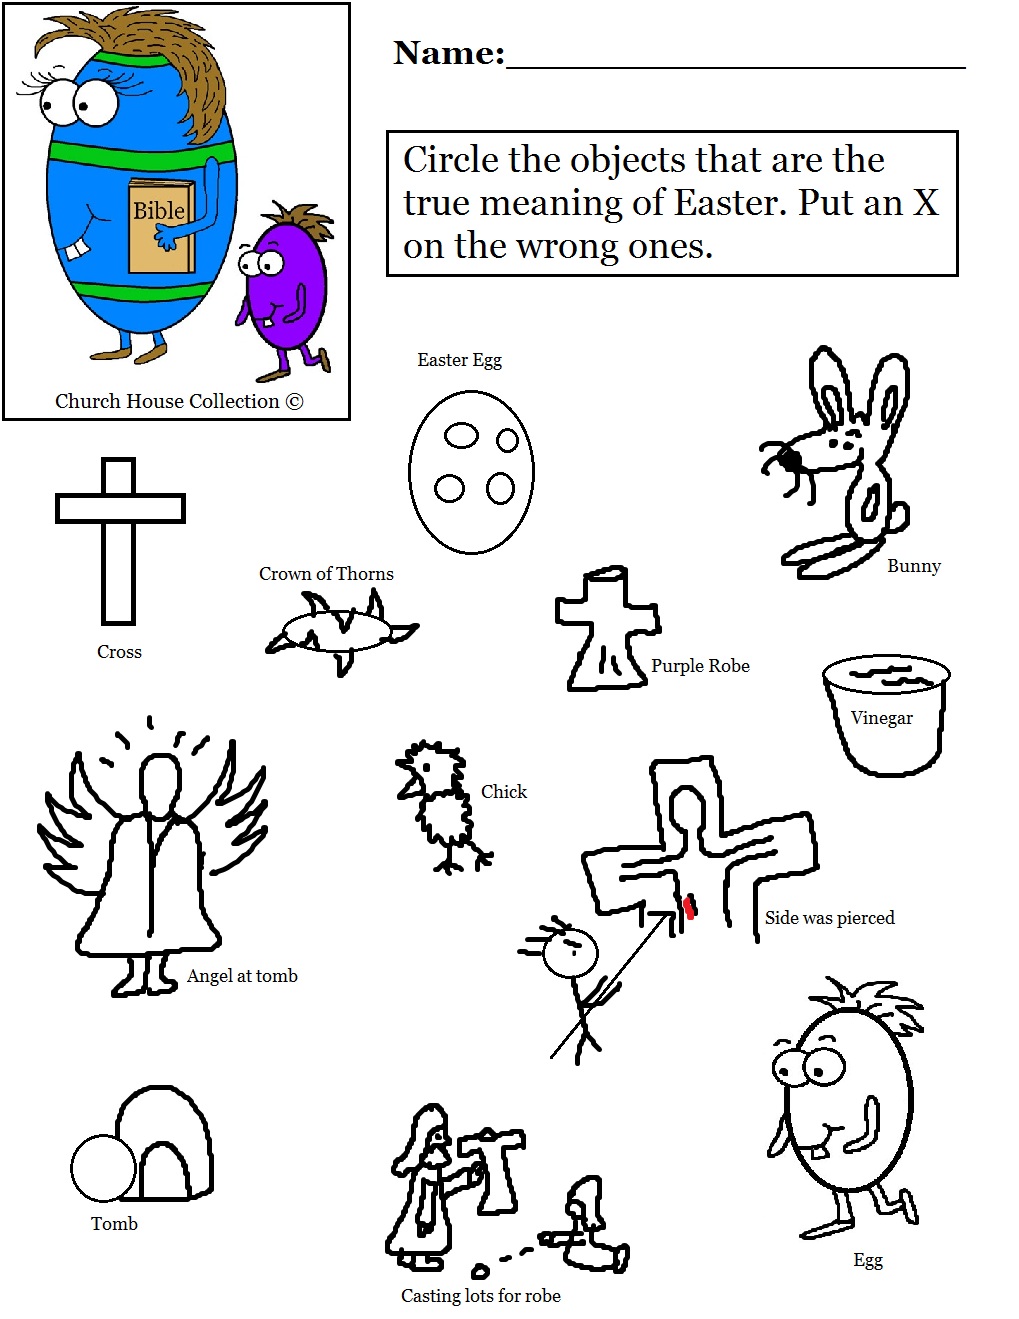 church-house-collection-blog-easter-egg-with-bible-worksheet